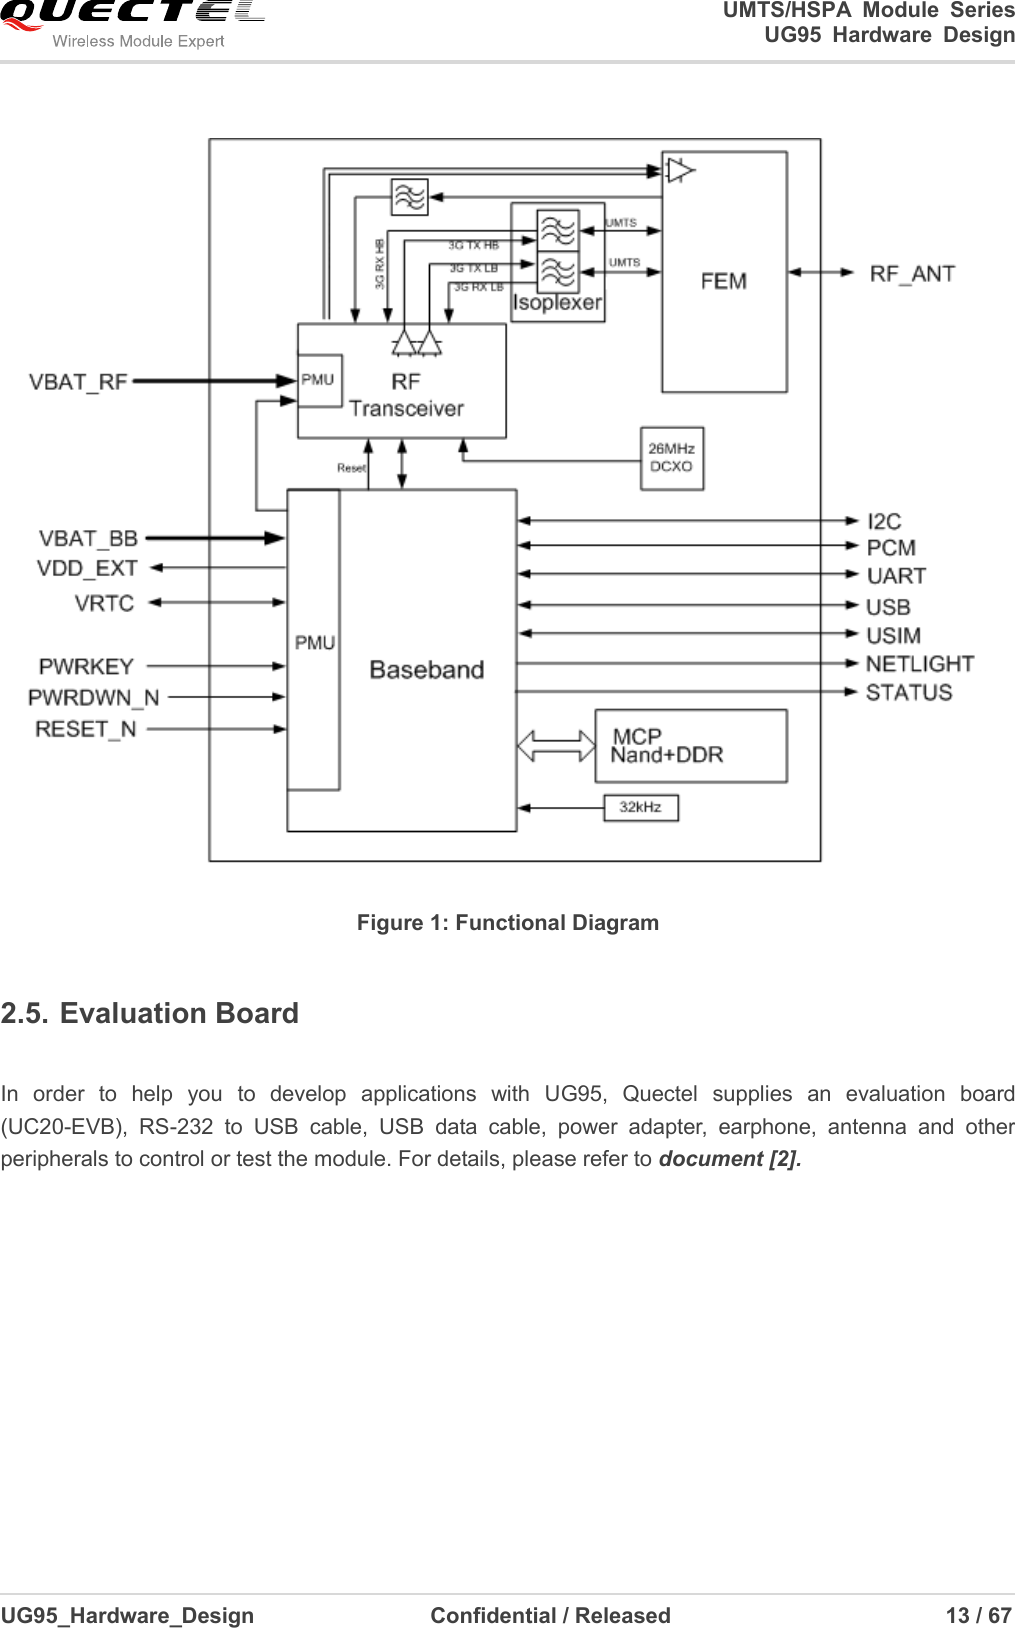                                                                                                                                               UMTS/HSPA  Module  Series                                                                 UG95  Hardware  Design  UG95_Hardware_Design                  Confidential / Released                             13 / 67     Figure 1: Functional Diagram 2.5. Evaluation Board    In  order  to  help  you  to  develop  applications  with  UG95,  Quectel  supplies  an  evaluation  board (UC20-EVB),  RS-232  to  USB  cable,  USB  data  cable,  power  adapter,  earphone,  antenna  and  other peripherals to control or test the module. For details, please refer to document [2]. 